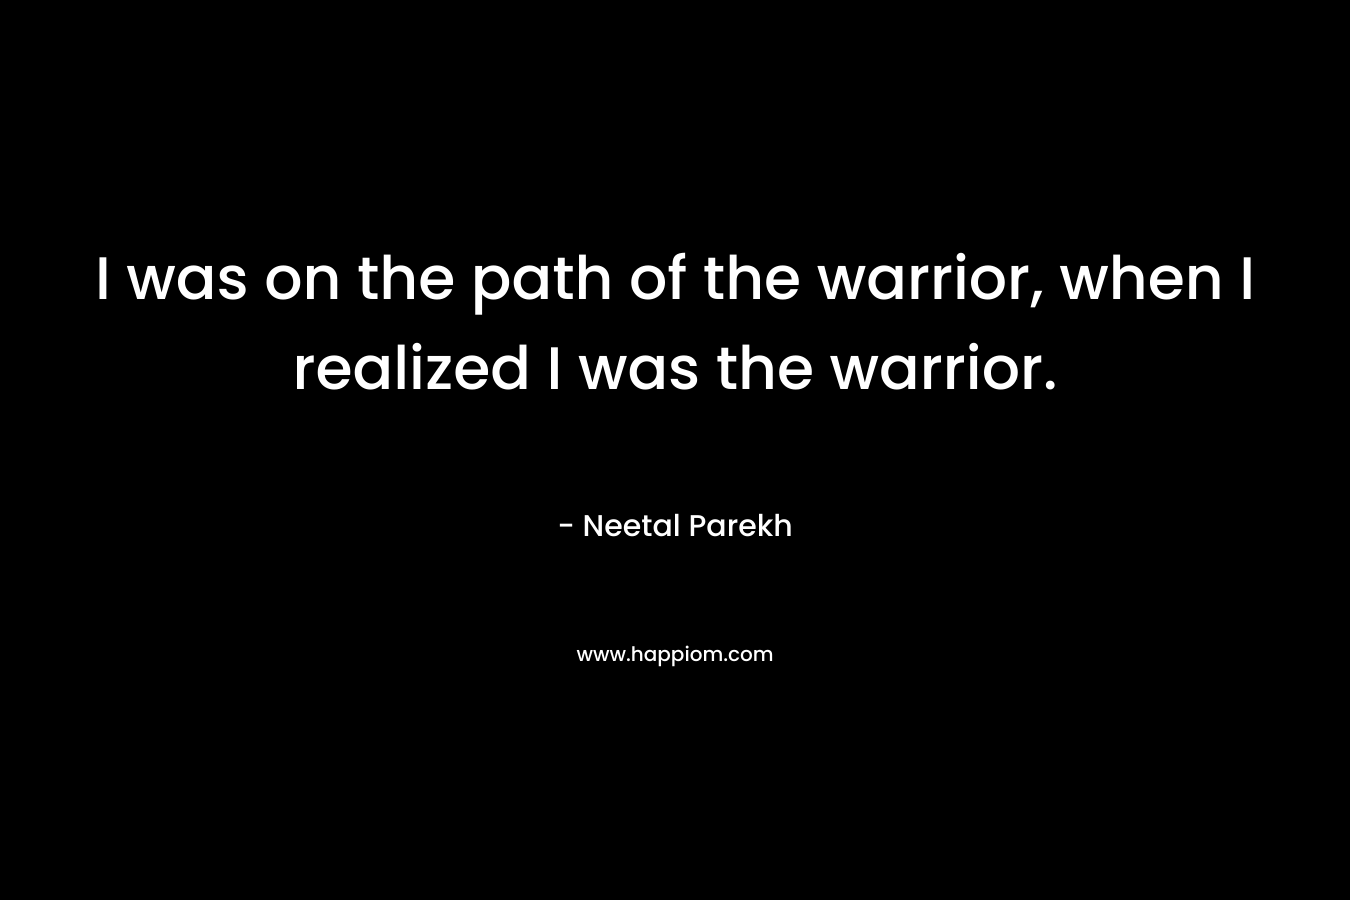 I was on the path of the warrior, when I realized I was the warrior.